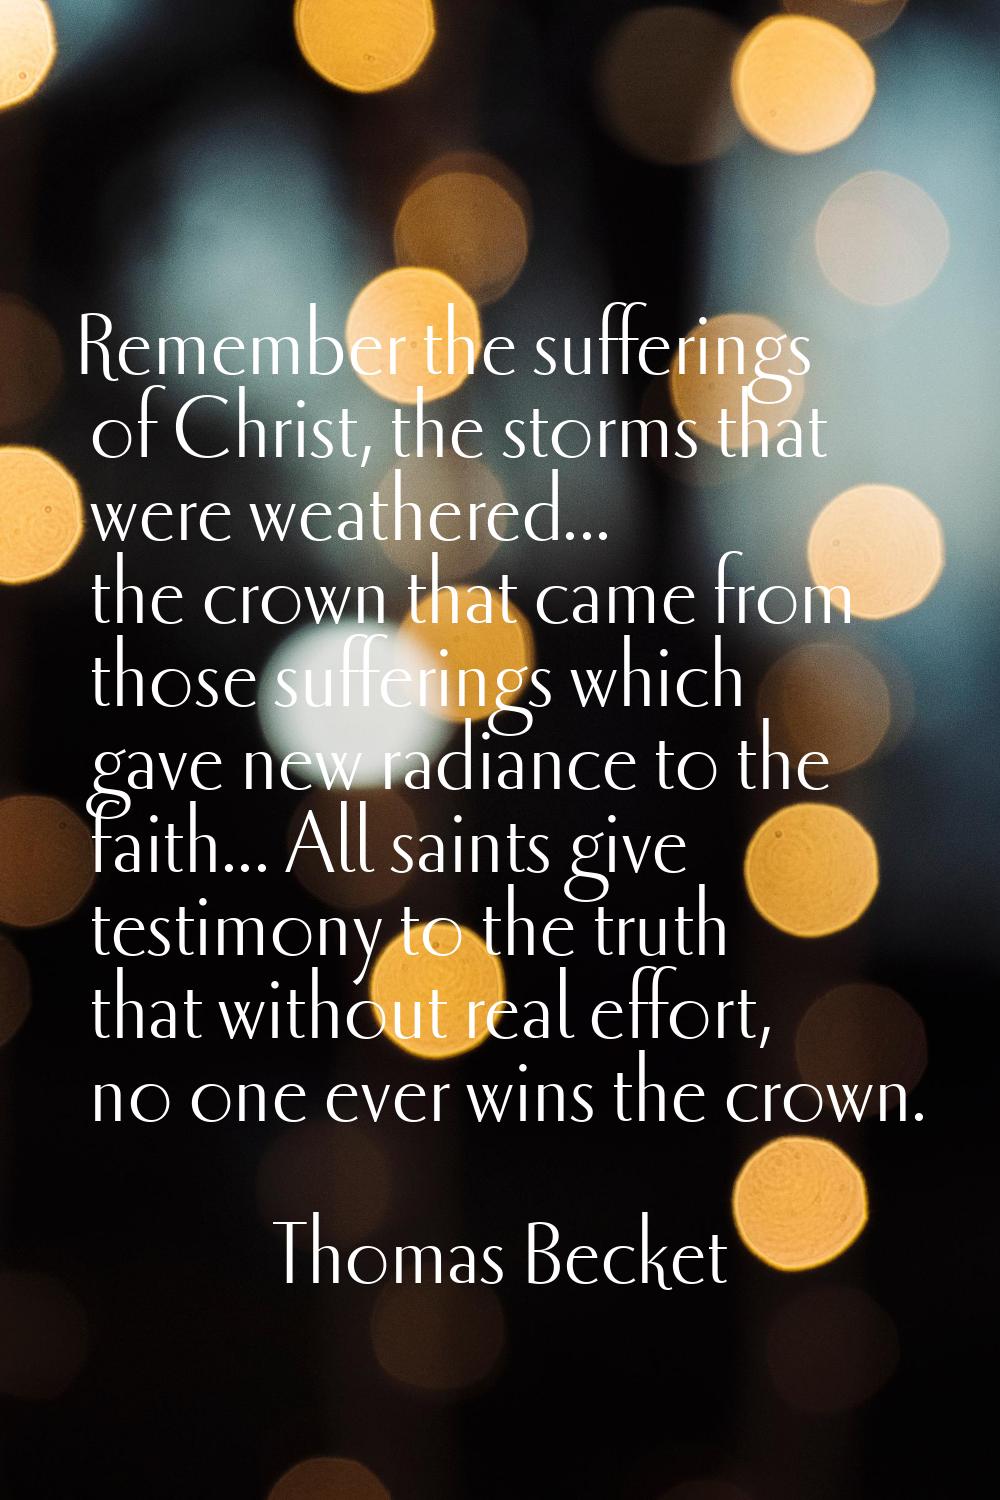 Remember the sufferings of Christ, the storms that were weathered... the crown that came from those